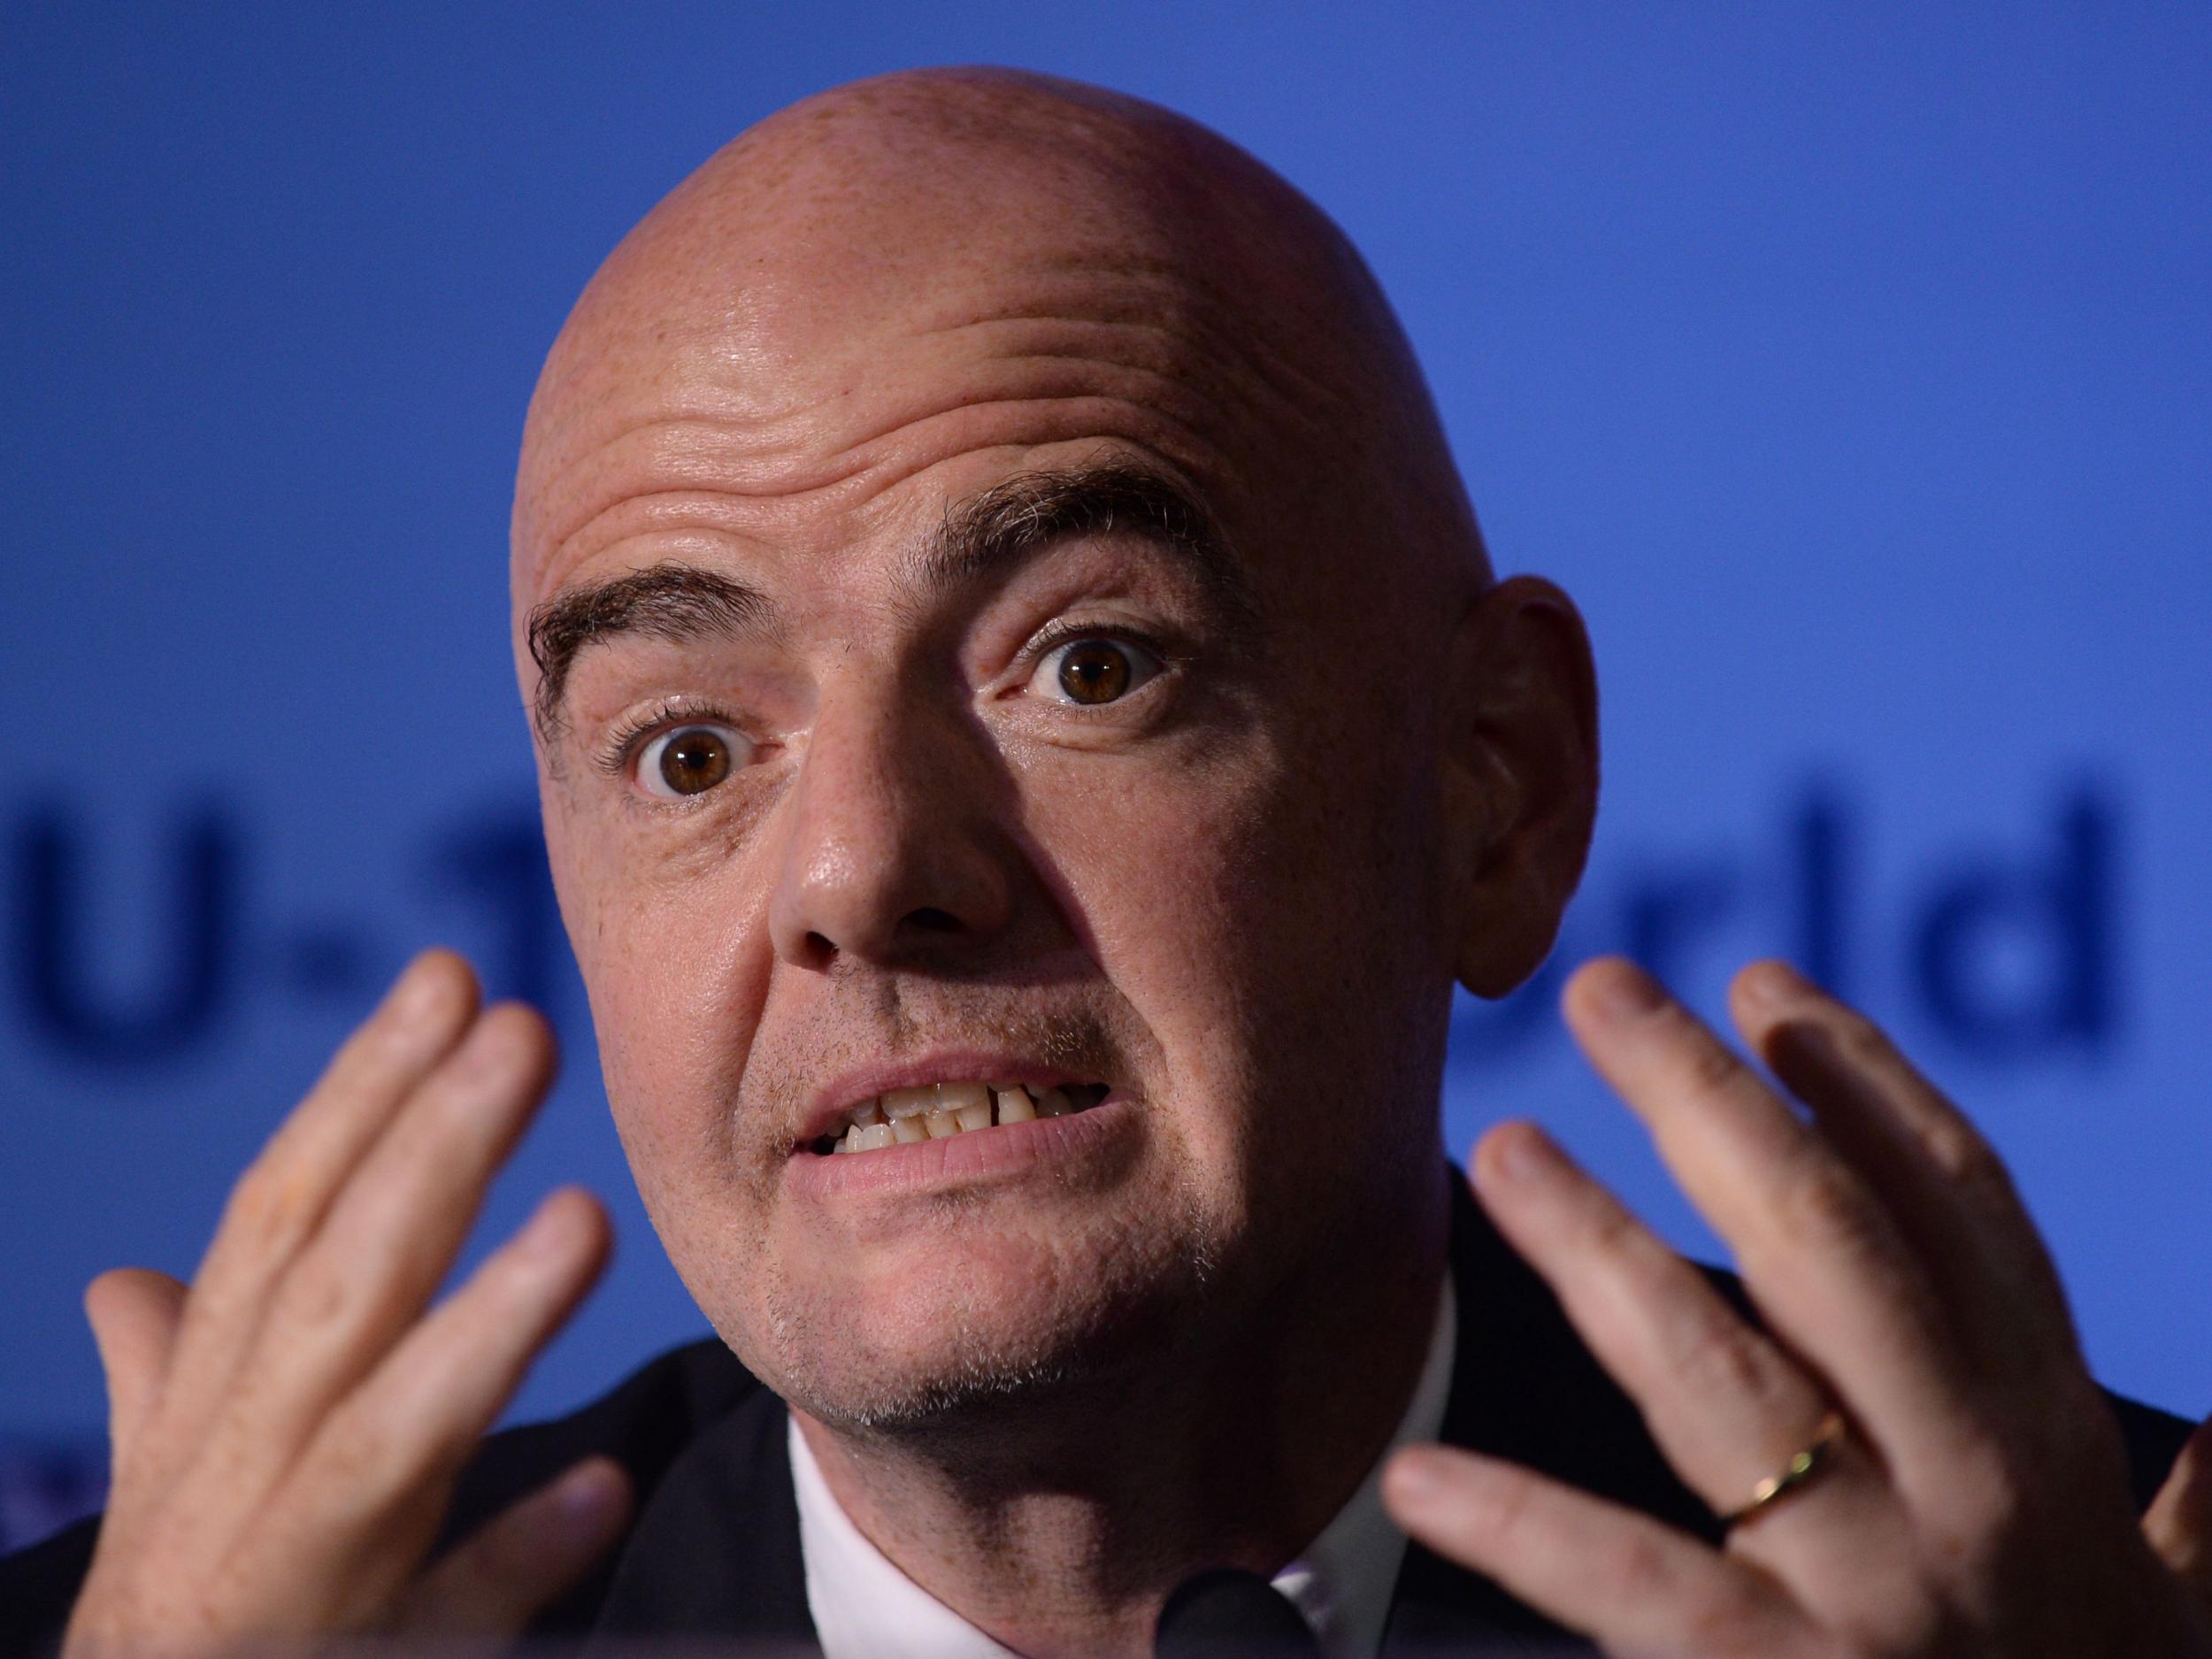 The Fifa president has been spending time in London